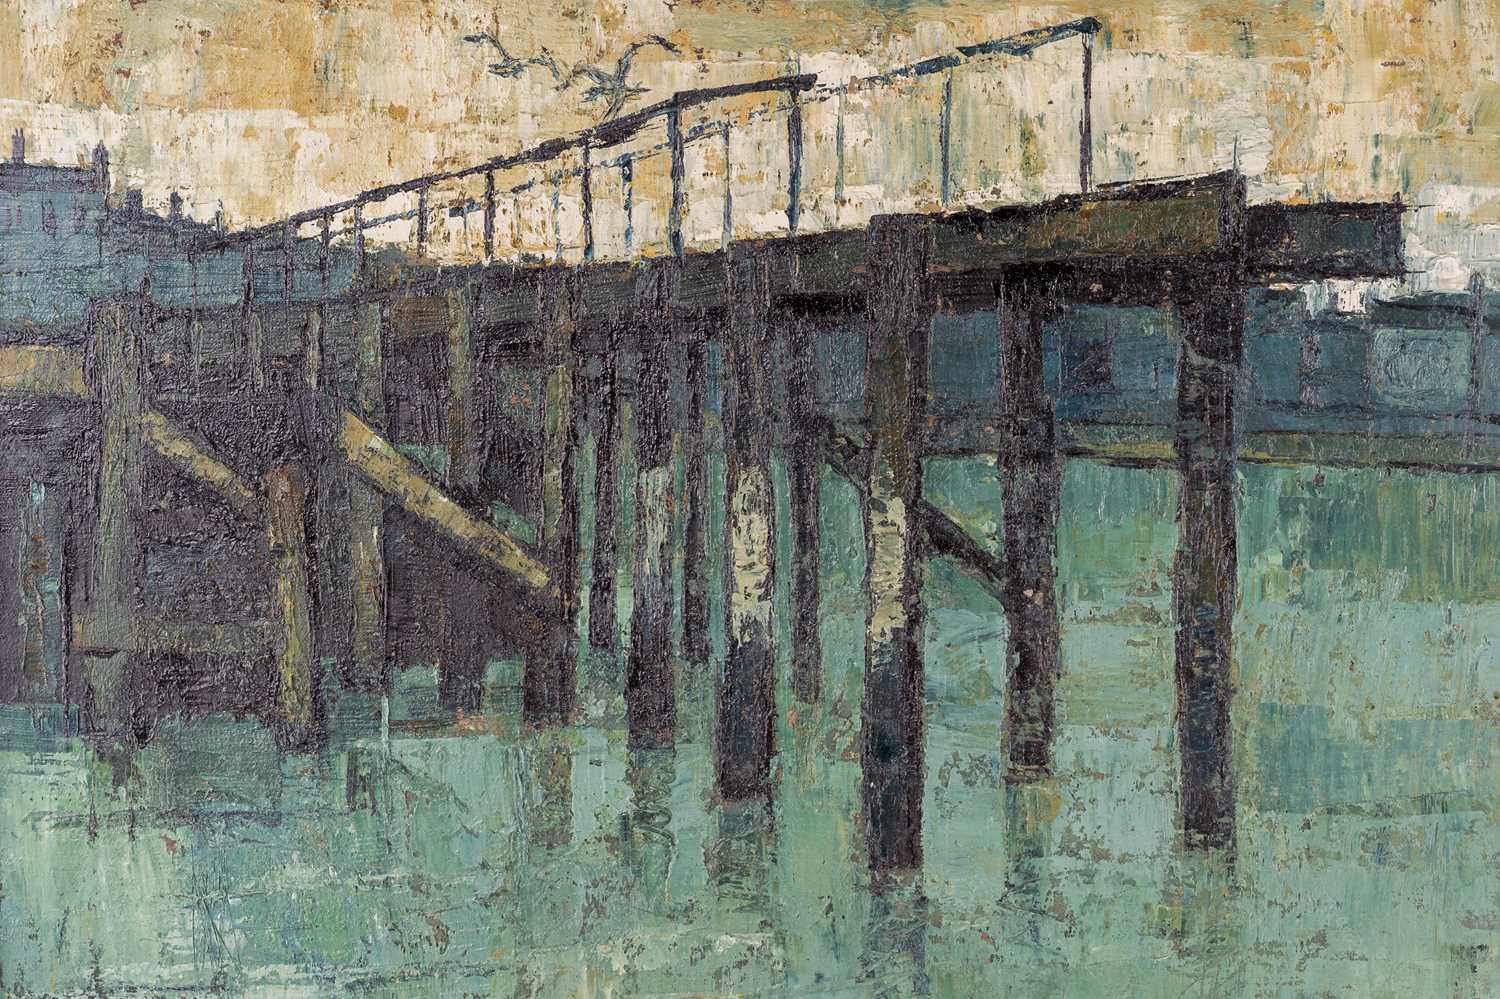 Paul Millichip (b. 1929), View of a pier, signed and dated '55, oil on canvas, framed, 60 x 75 cm - Image 4 of 8